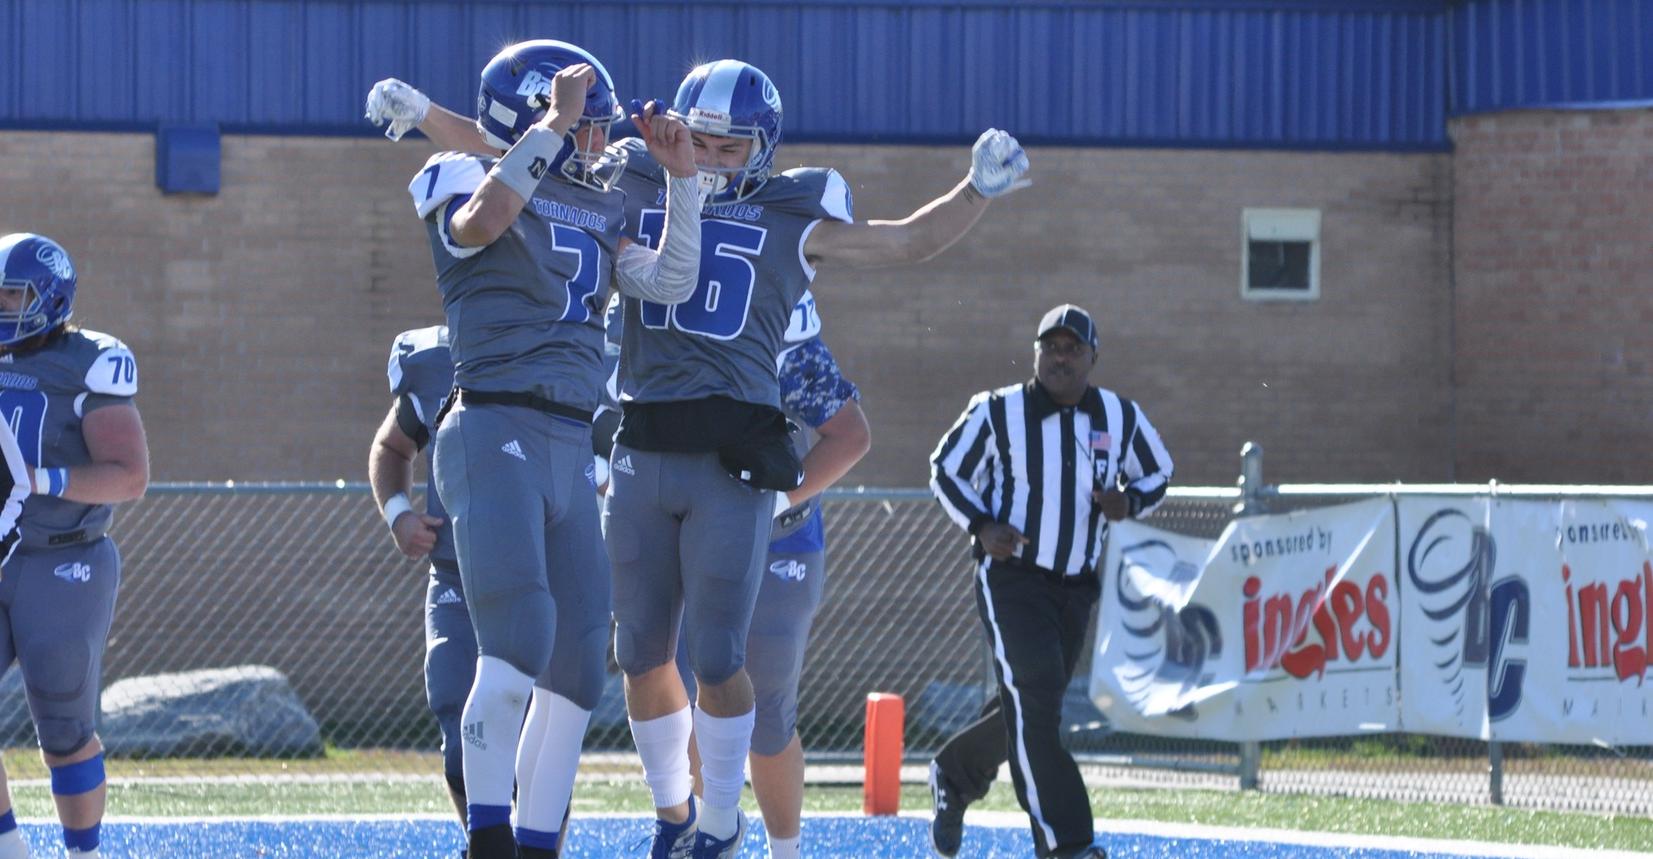 Sophomores Dalton Cole and Blake Taylor, who linked up for the game-winner last week vs. Averett, celebrate following a touchdown last season against Greensboro College (Photo courtesy of Tommy Moss).